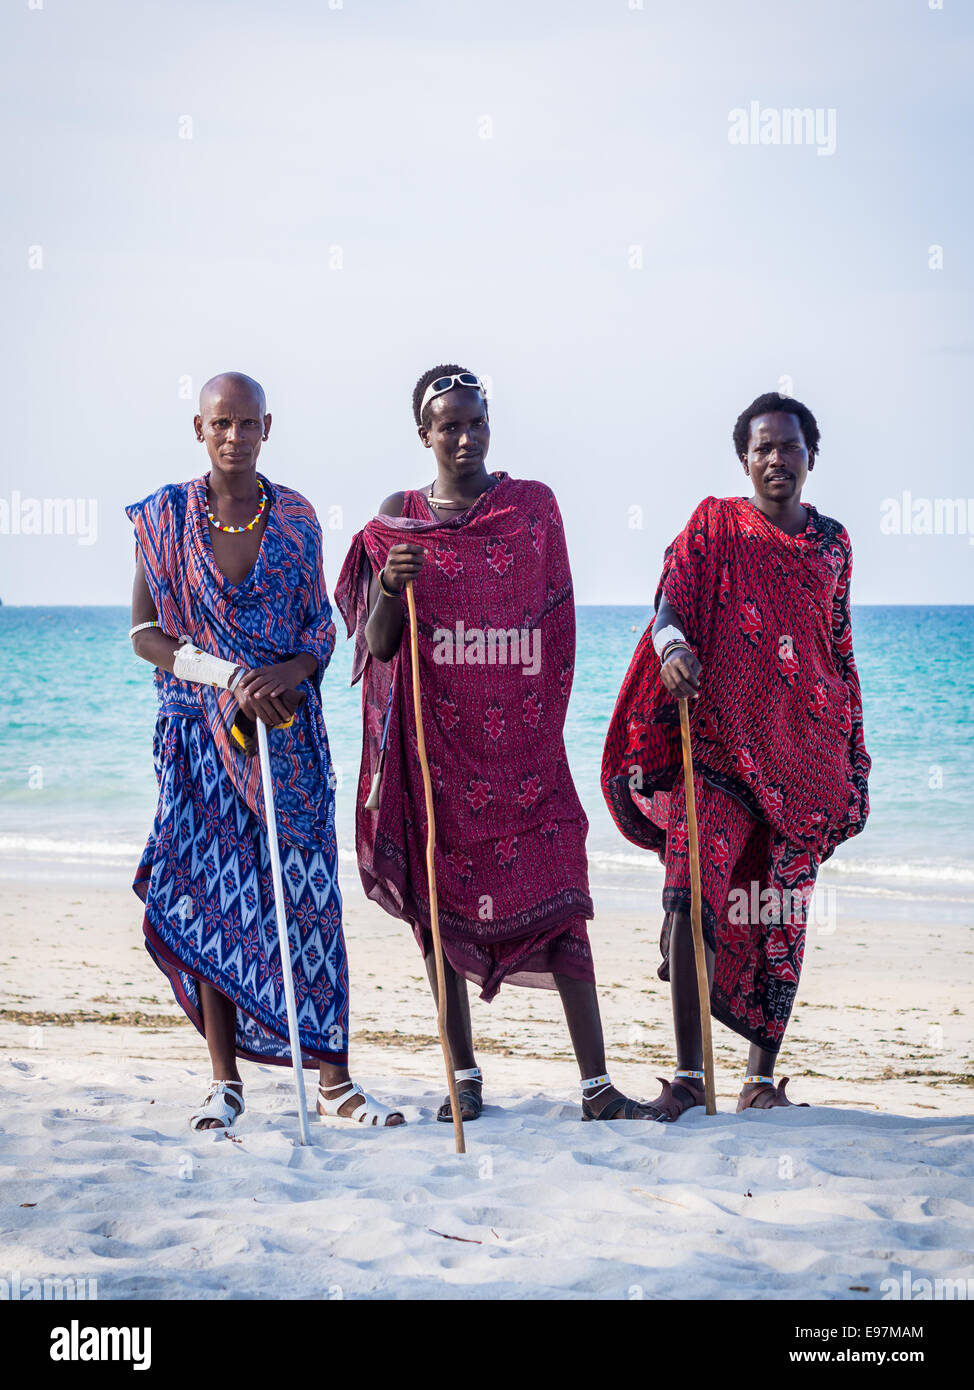 Men in traditional Maasai clothes on South Beach in Dar es Salaam, the capital of Tanzania. Stock Photo